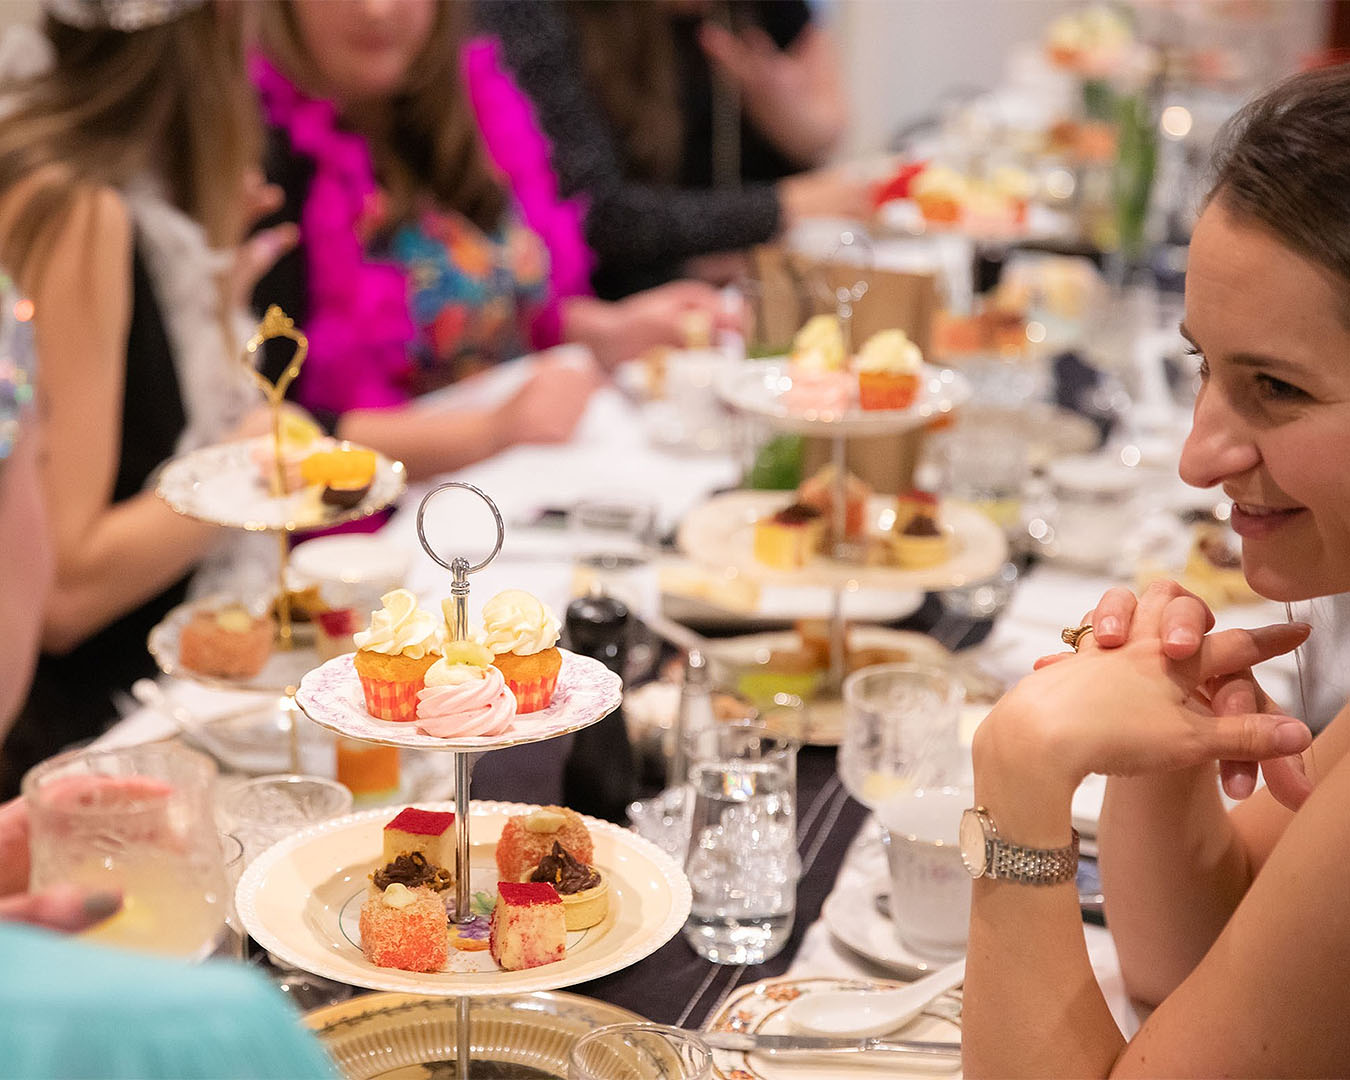 People sit down to enjoy a tipsy high tea dressed up in 1920s outfits at Hotel Debrett.